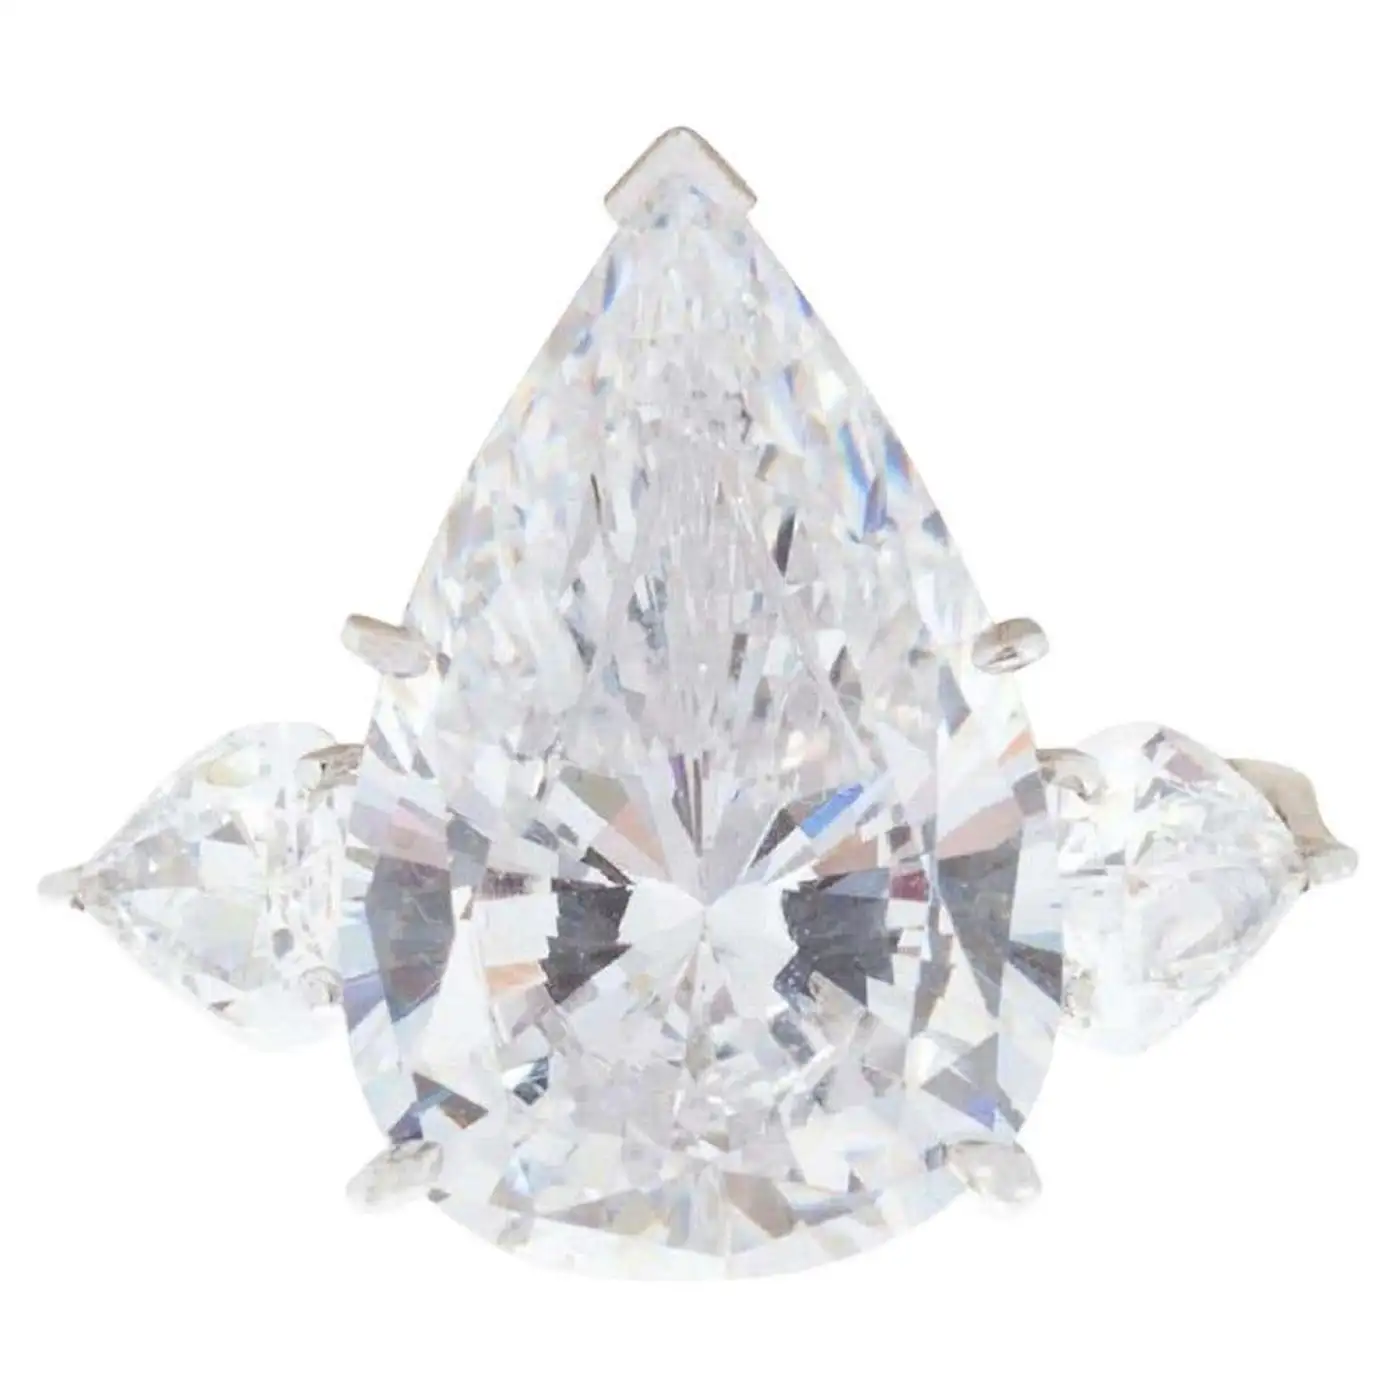 Exceptional-Flawless-GIA-Certified-18-Carat-Pear-Cut-Diamond-Ring-3.webp